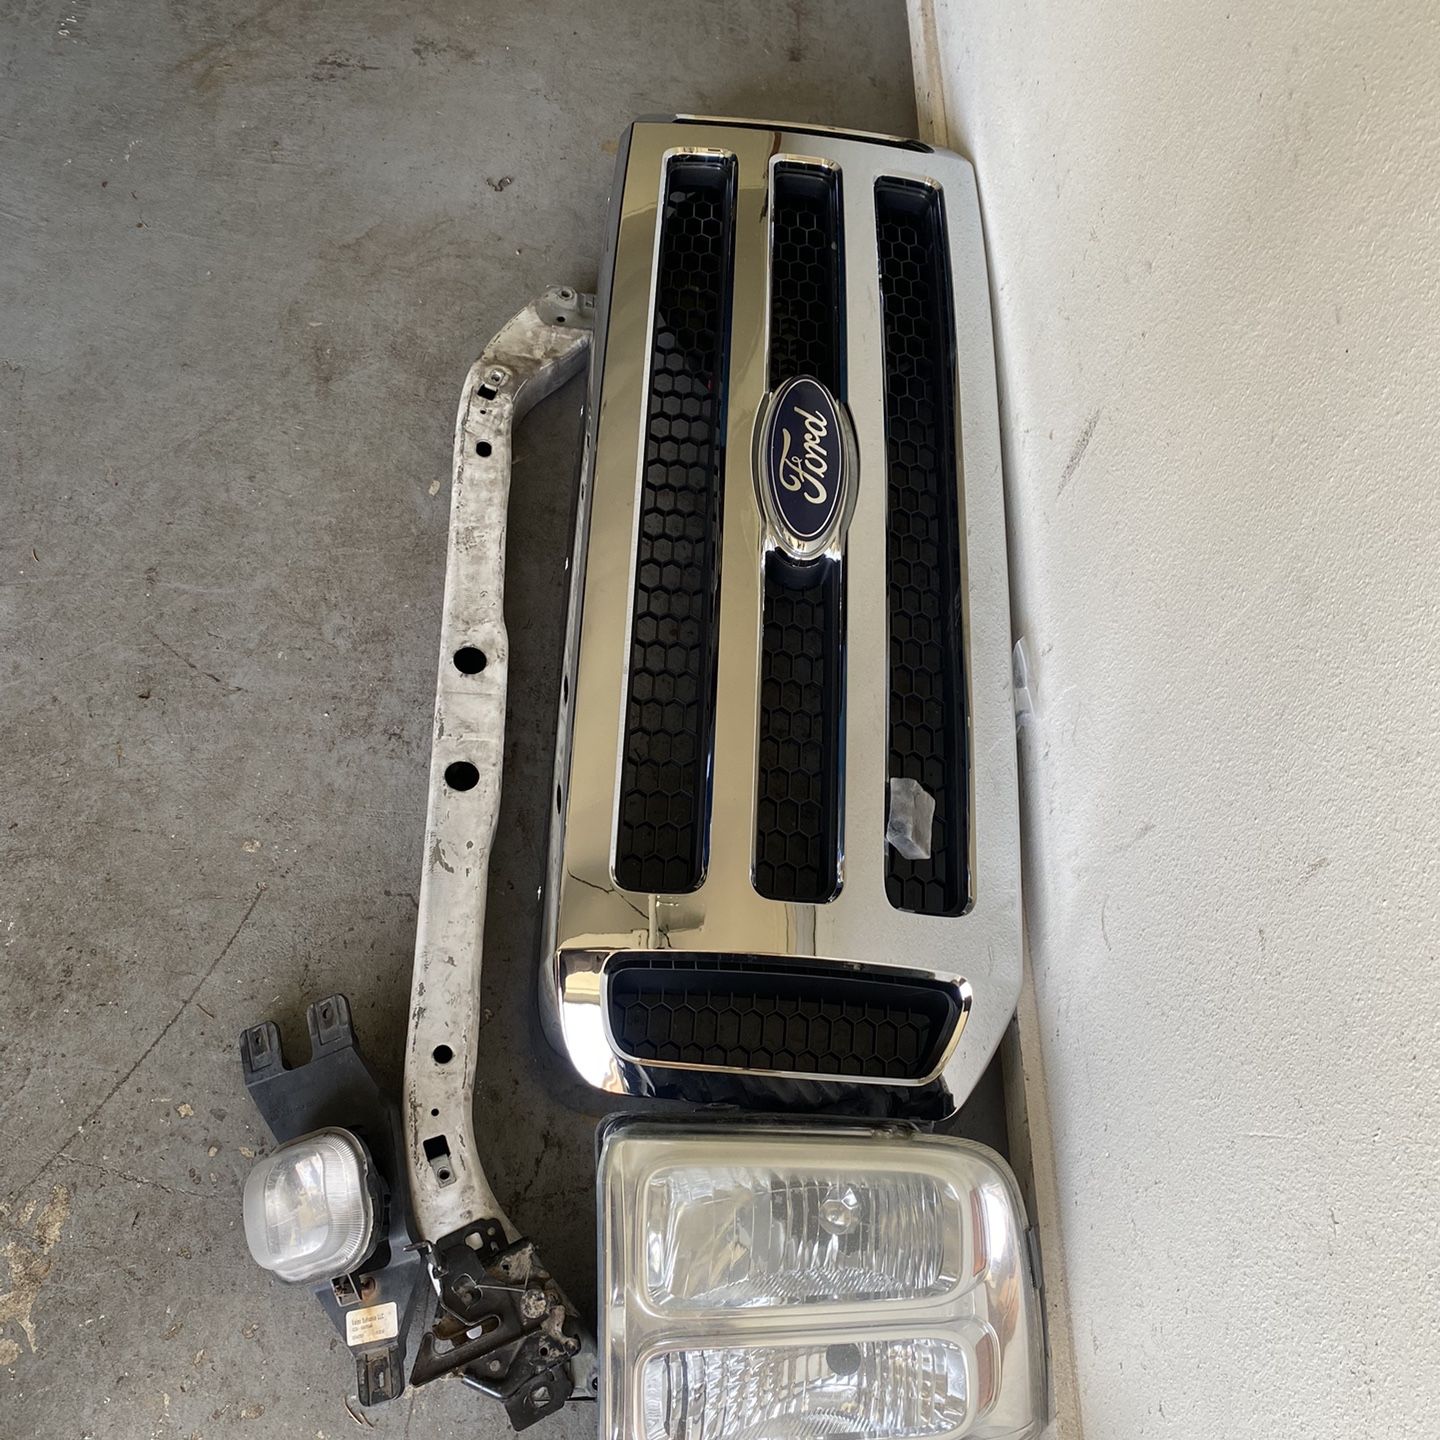 Superduty Grille, Header Panel, Light And Parts